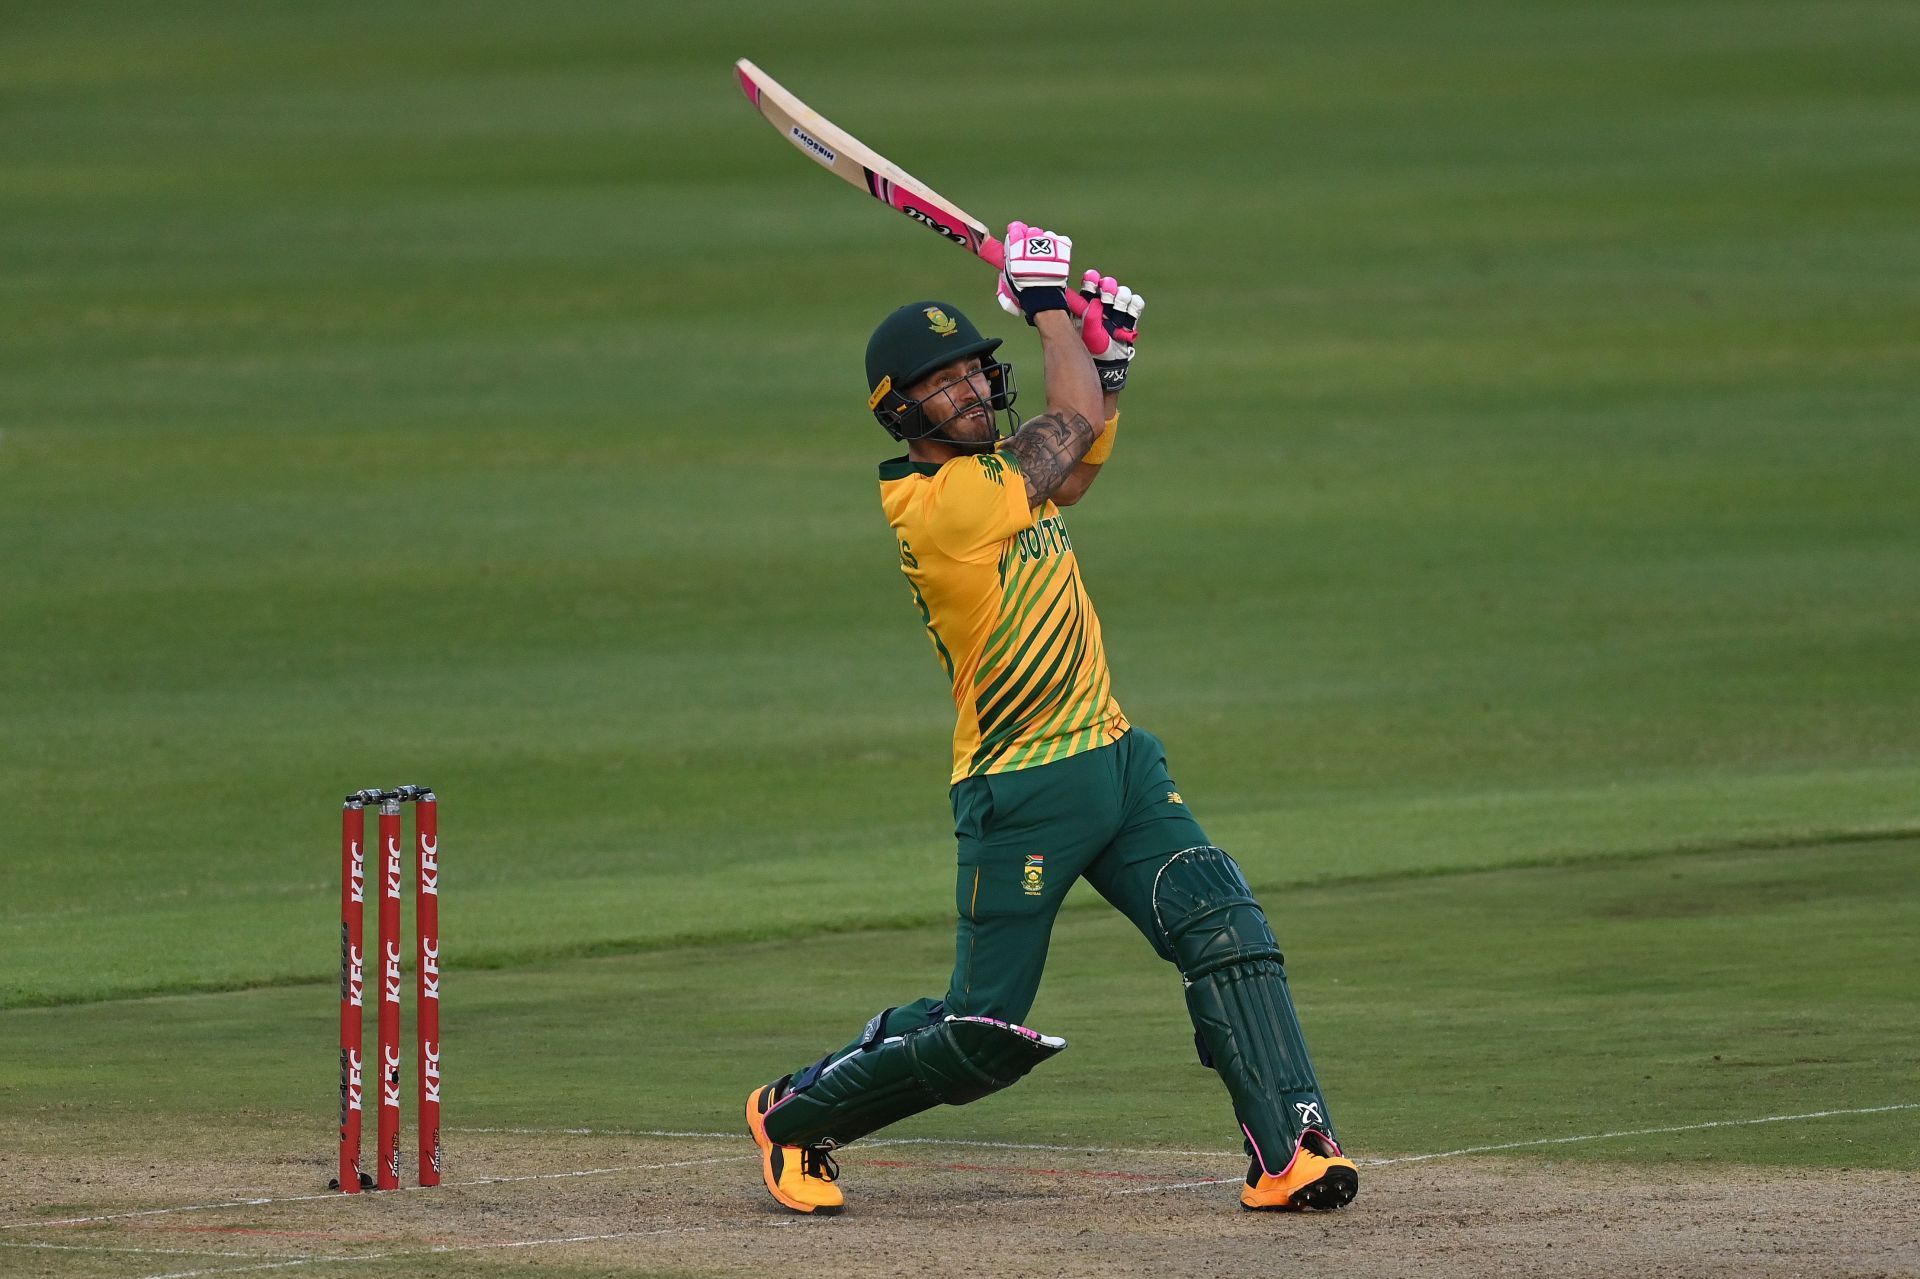 The former South African skipper Faf du Plessis&#039; wicket will be a key scalp for Delhi Bulls